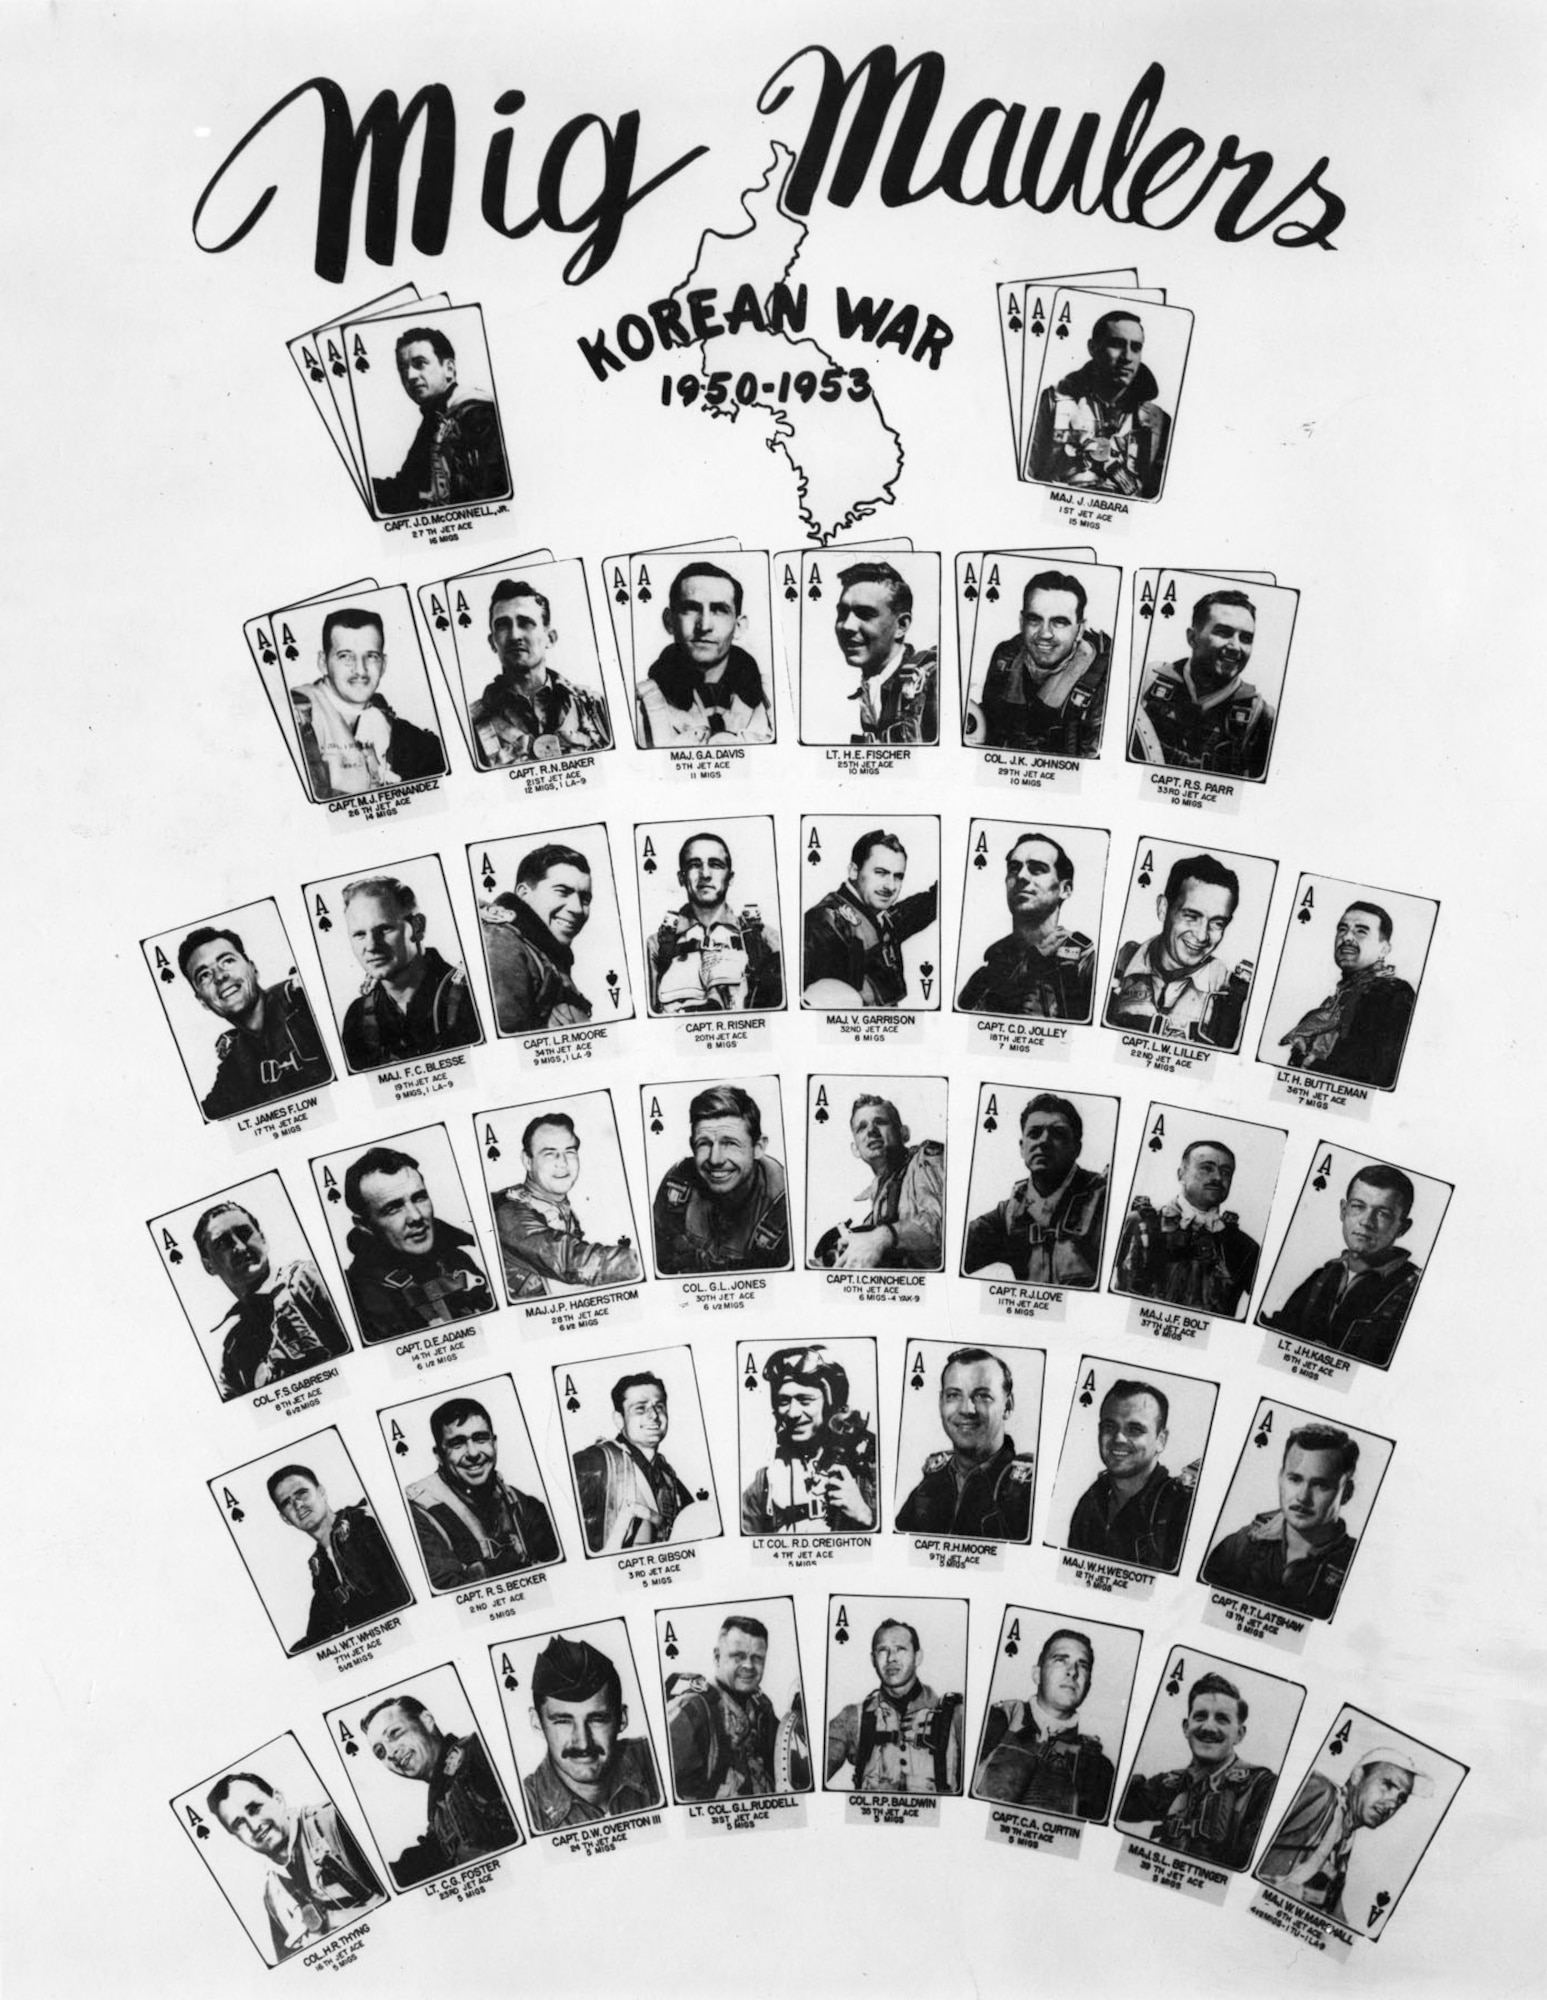 Thirty-nine USAF F-86 pilots (and one Marine Corps exchange pilot) became Korean War aces. Not pictured is 1st Lt. (later Lt. Gen.) Charles Cleveland, who belatedly received credit for his fifth kill in 2008. (U.S. Air Force photo)